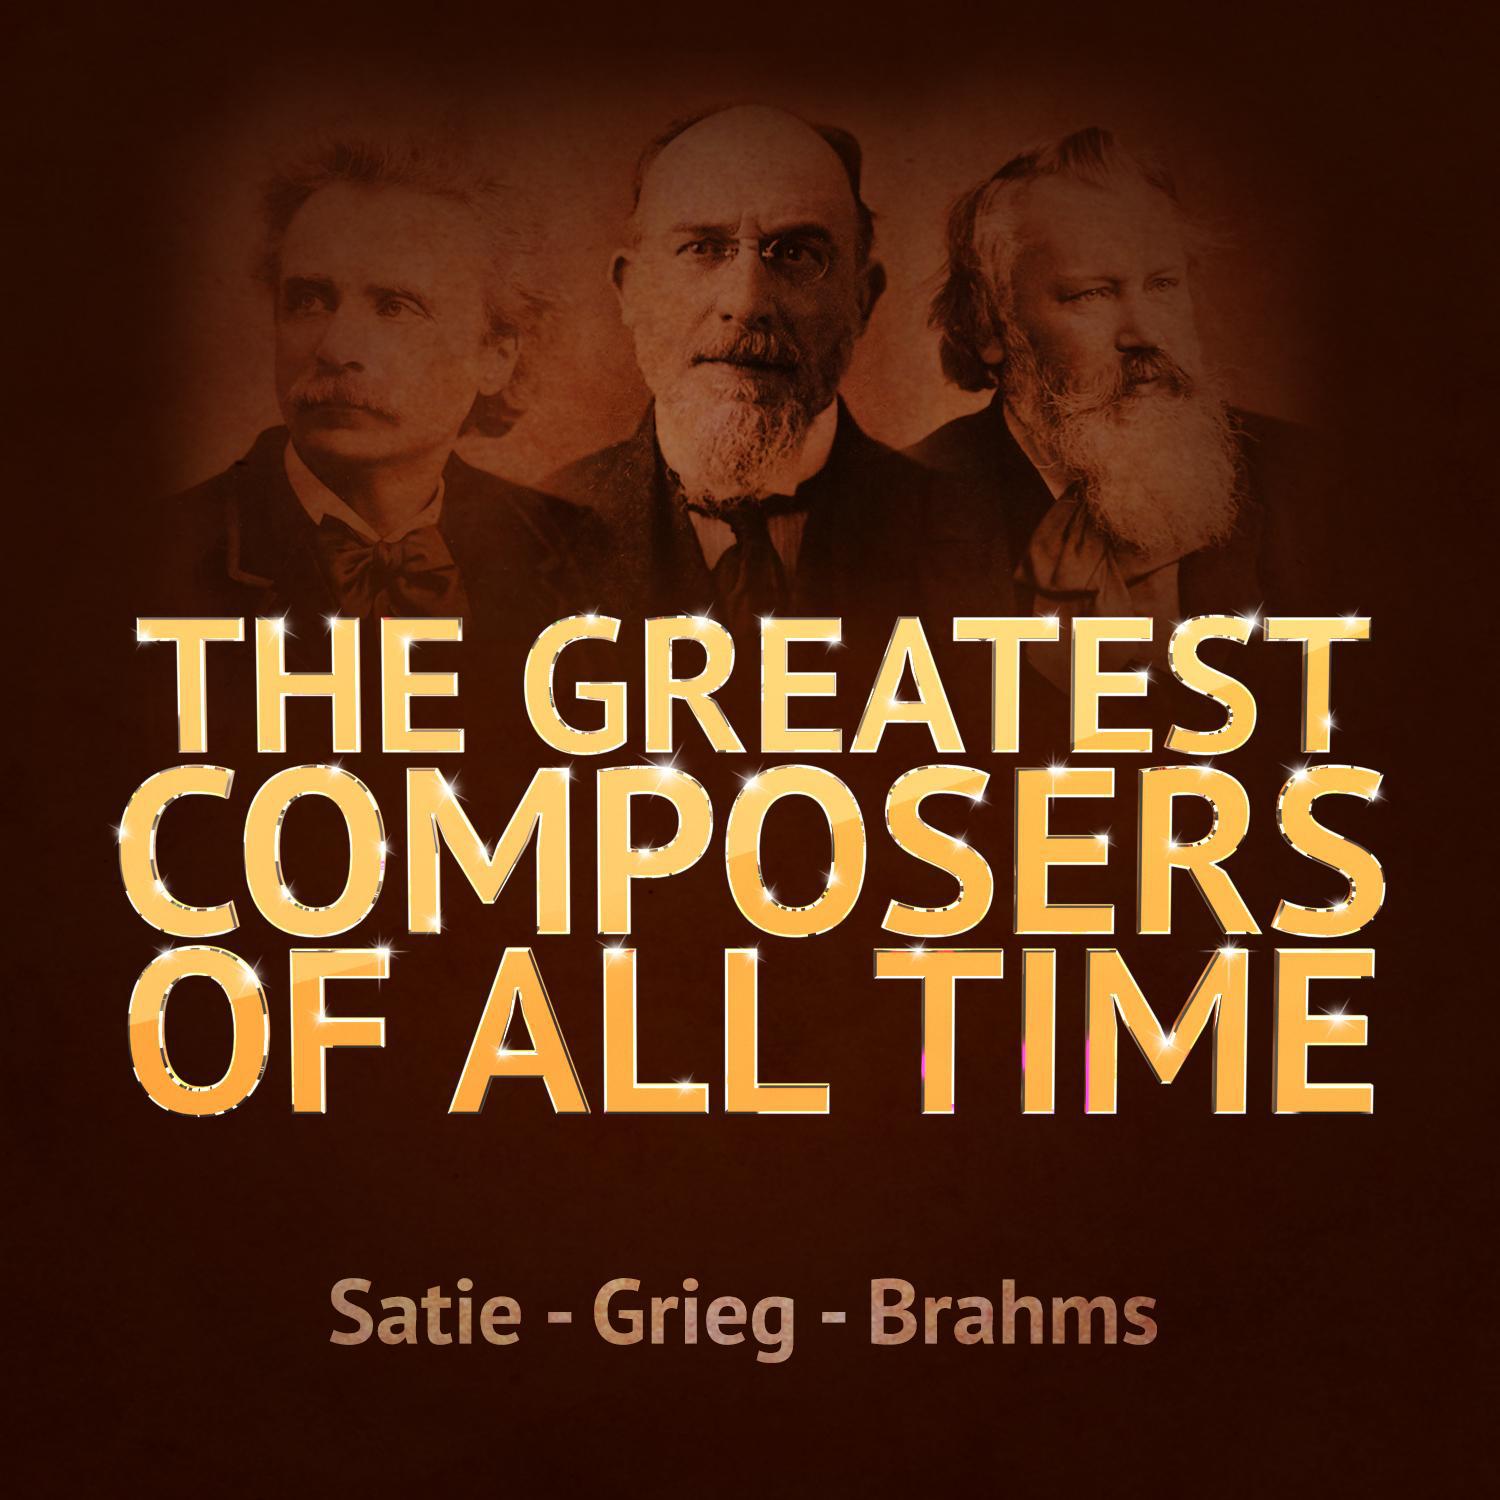 The Greatest Composers of All Time - Satie, Grieg and Brahms